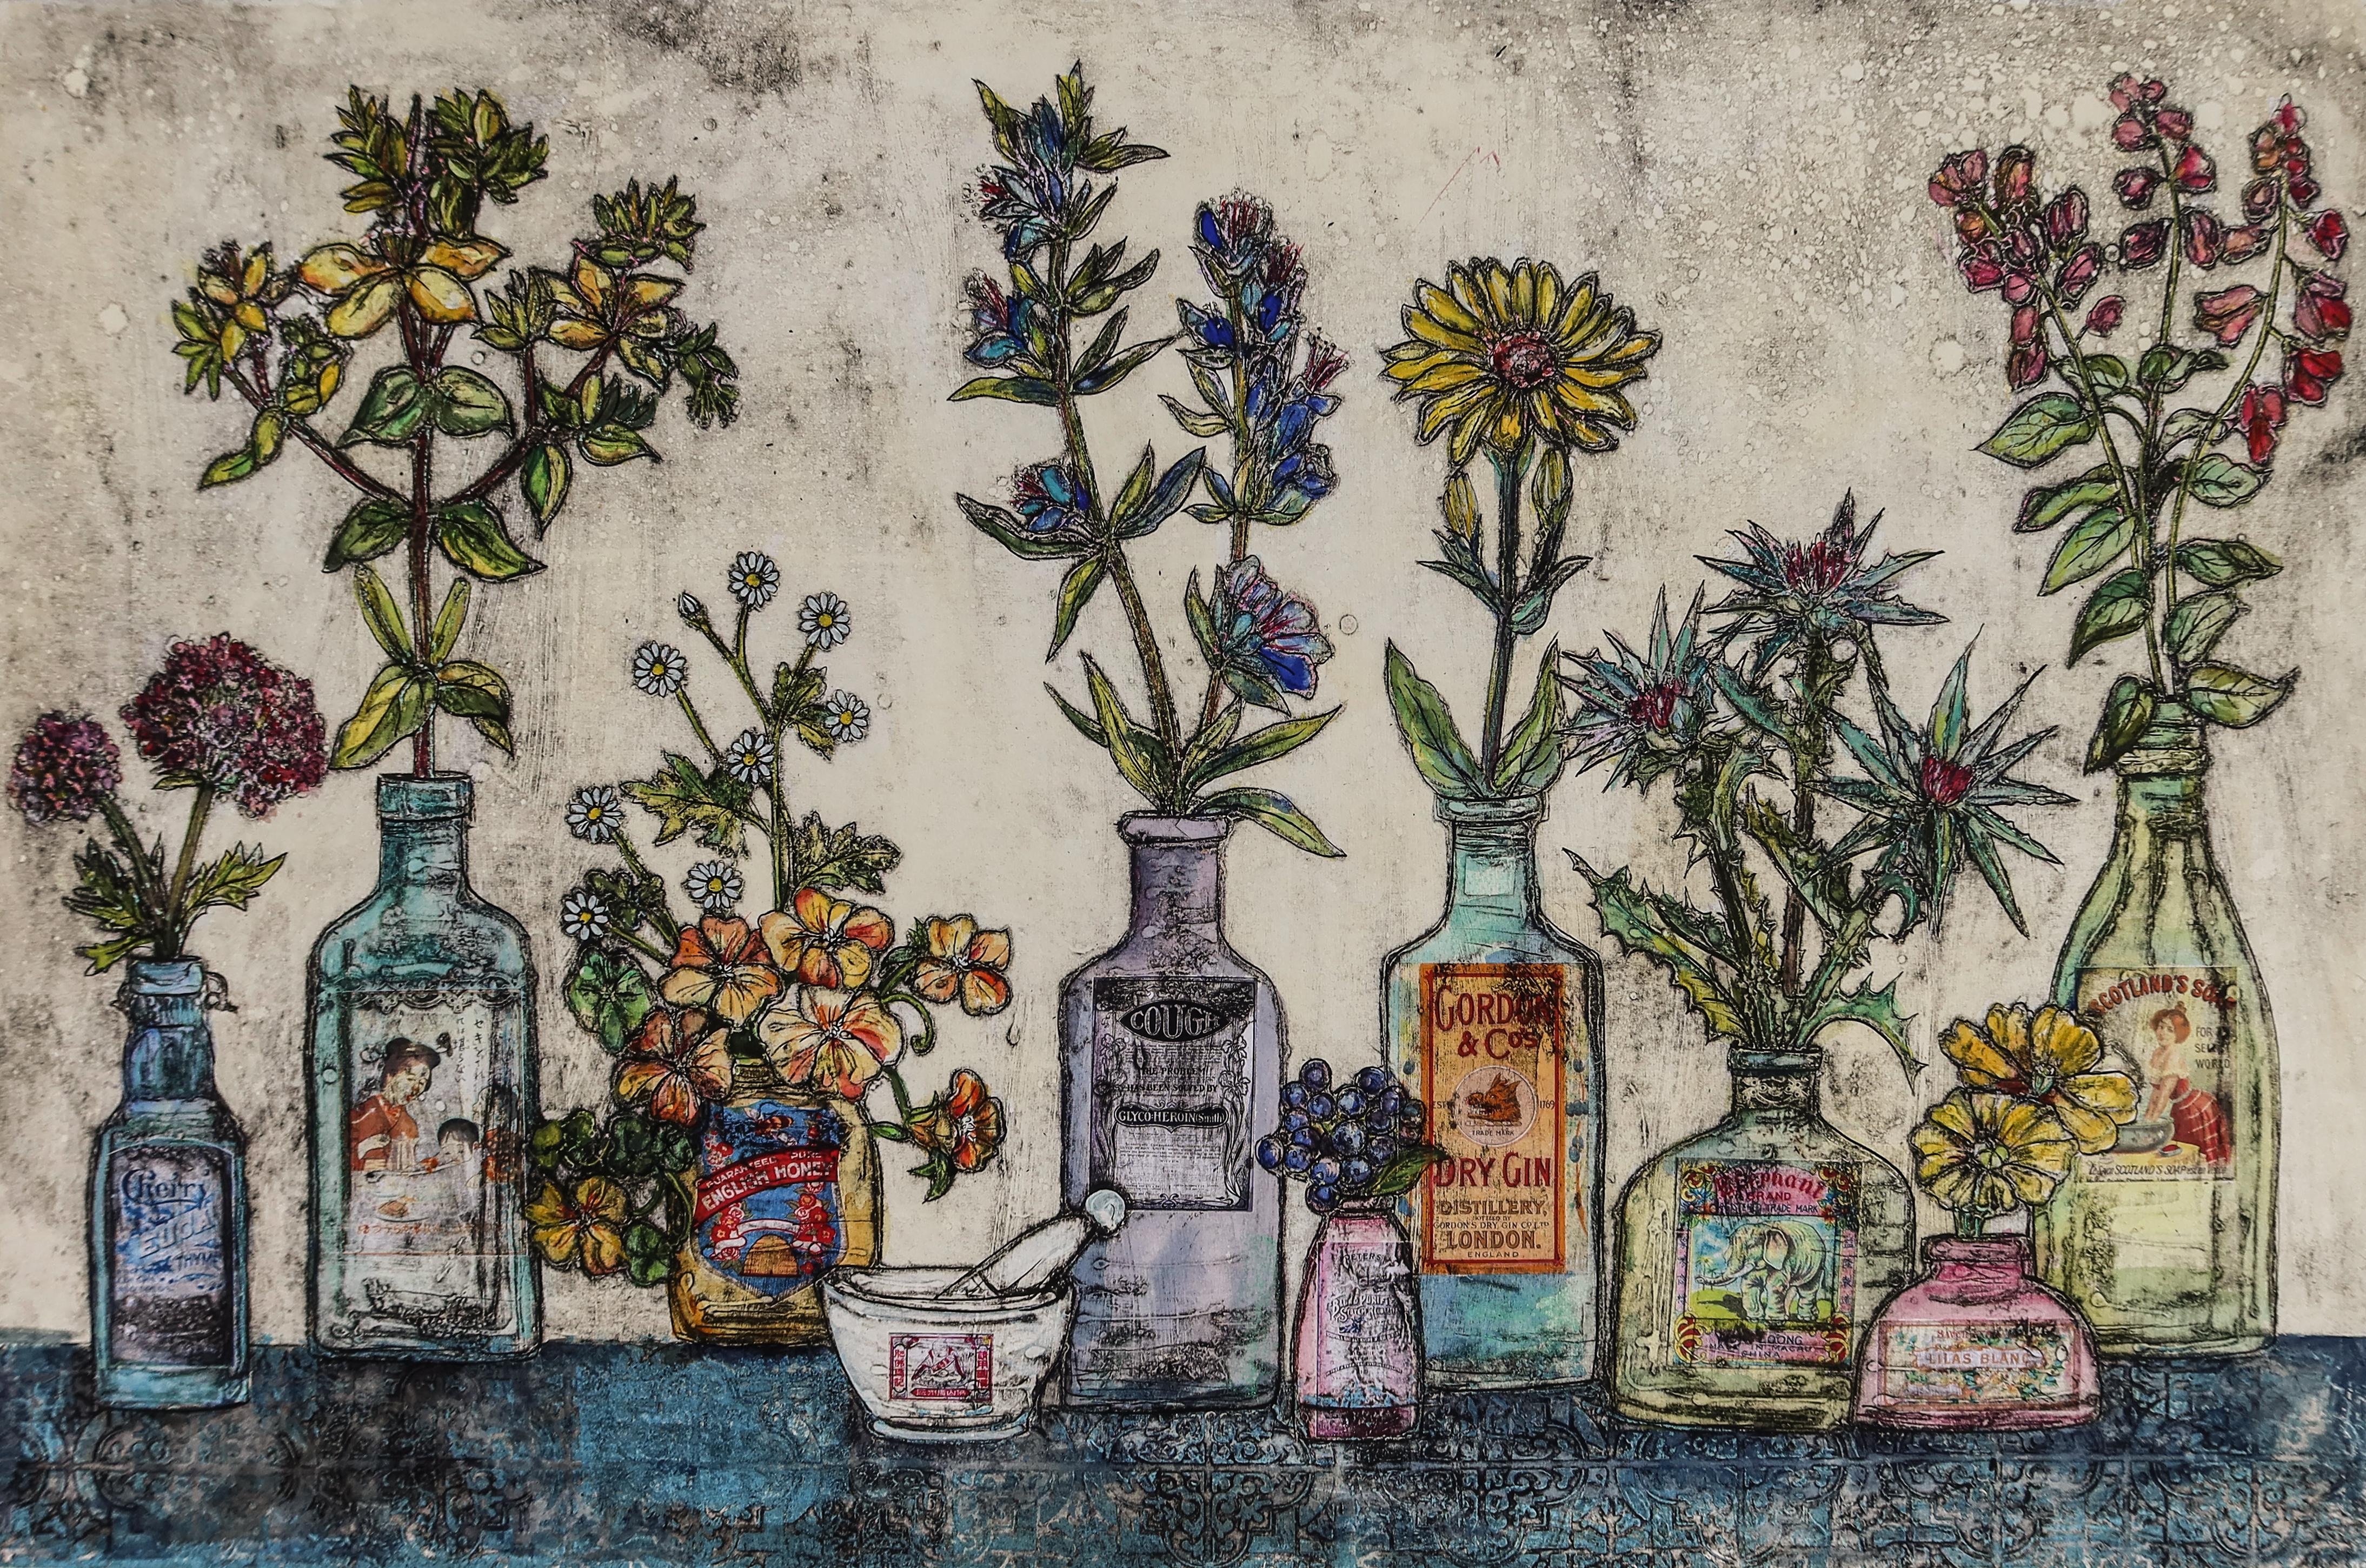 Plants are things of beauty, but they have a purpose beyond decoration. This piece invites quiet reflection on human’s relationship with plants. I love history and stories and was inspired to research the Spanish flu epidemic and the wonderful